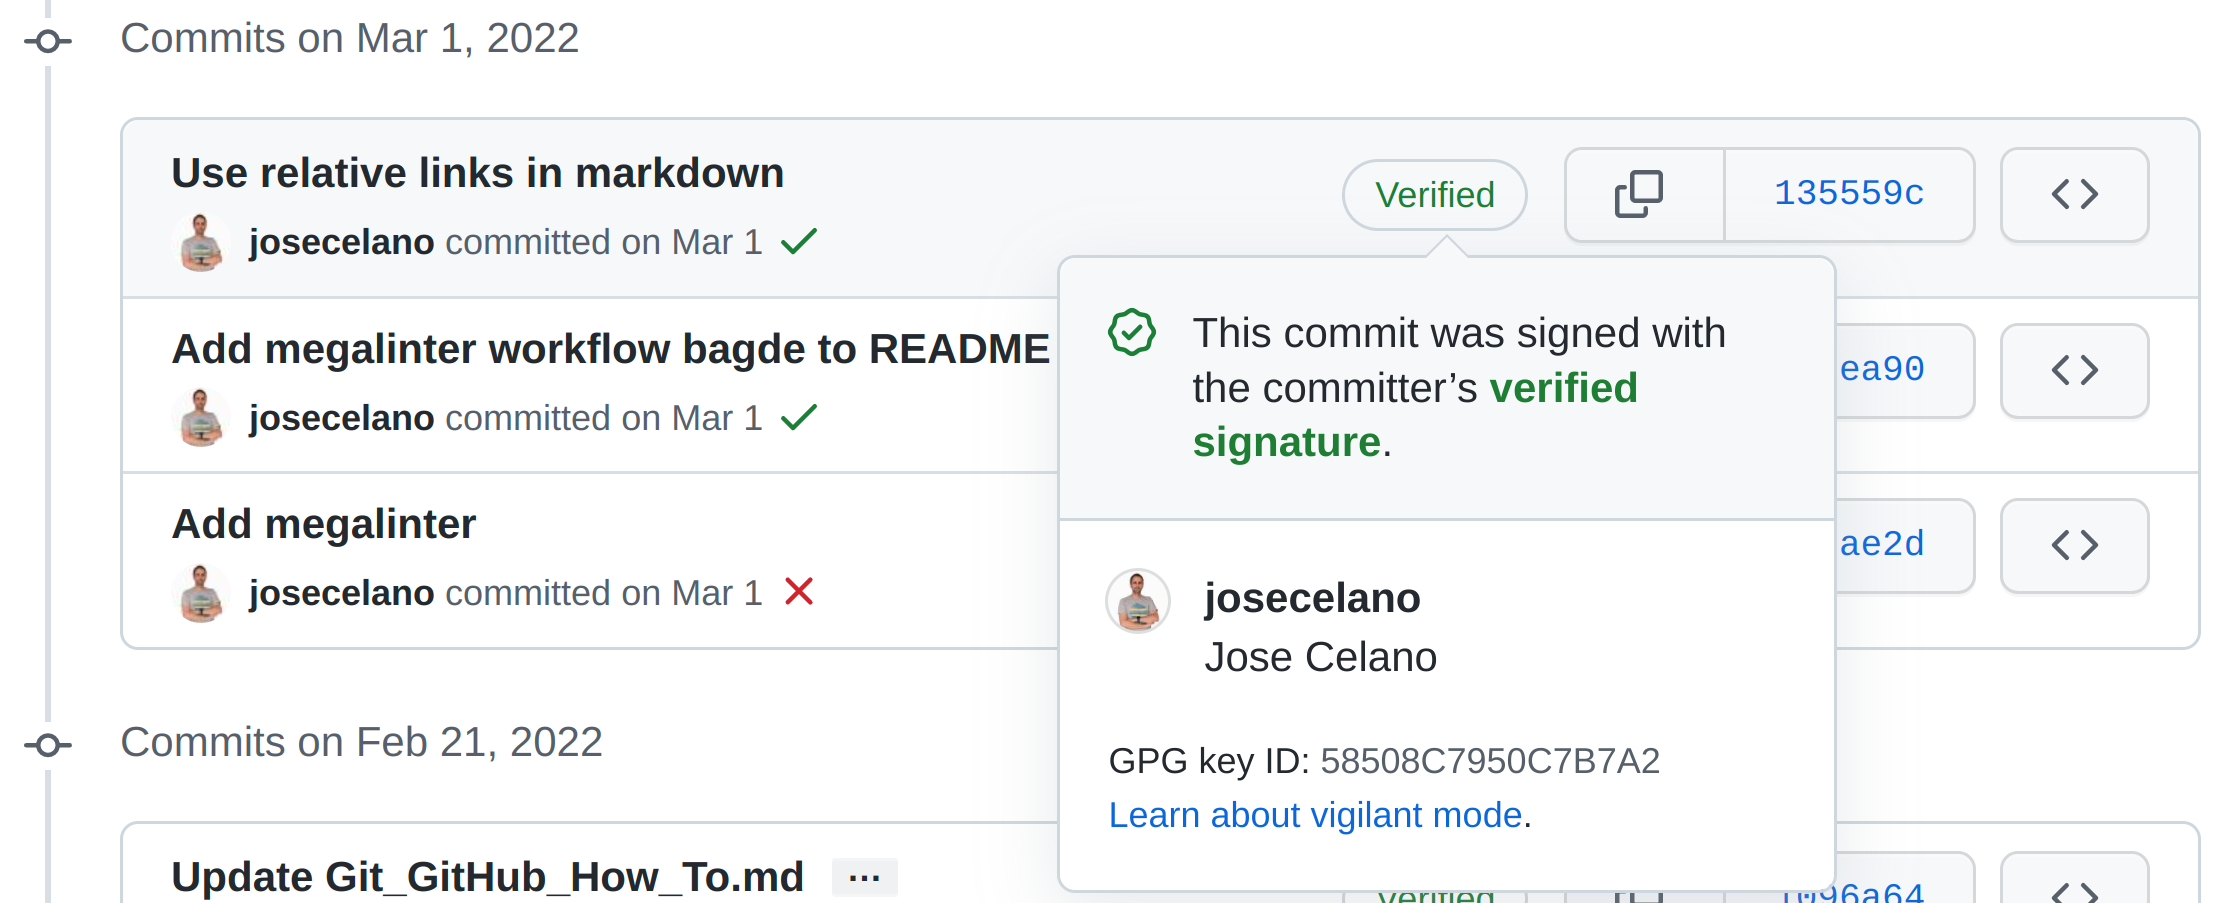 Commit with verified signature